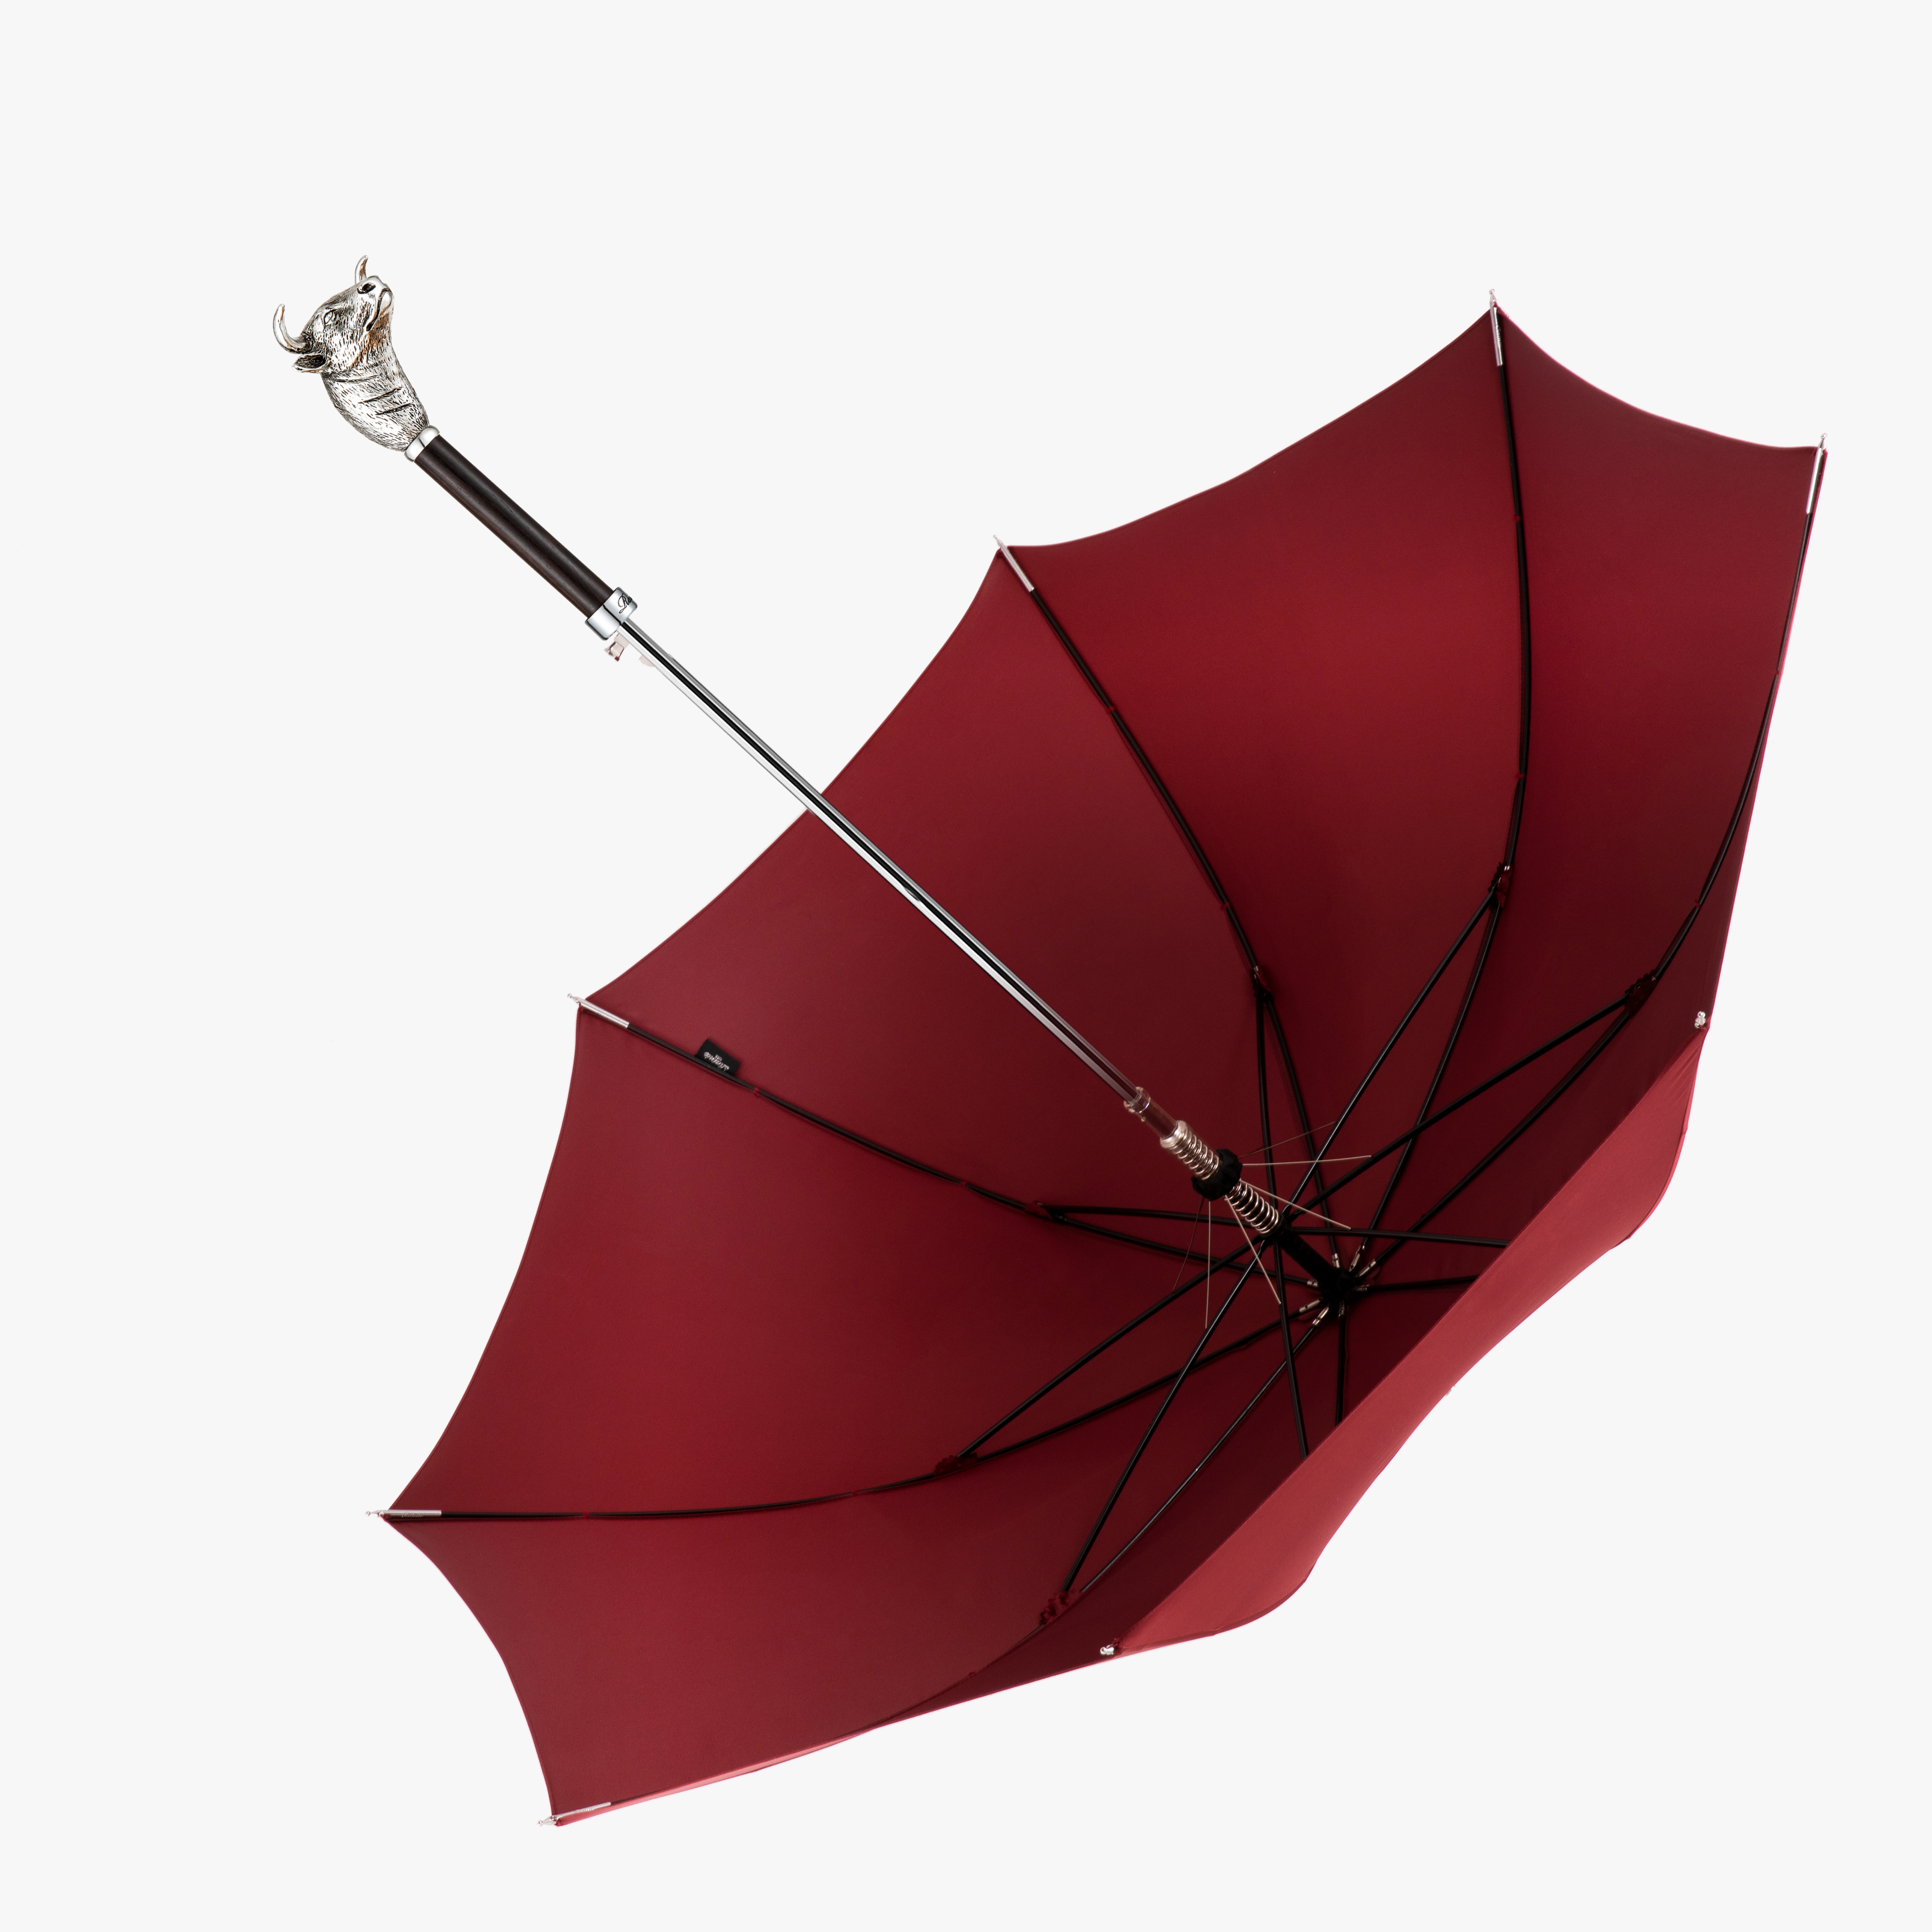 Bull umbrella with a straight handle